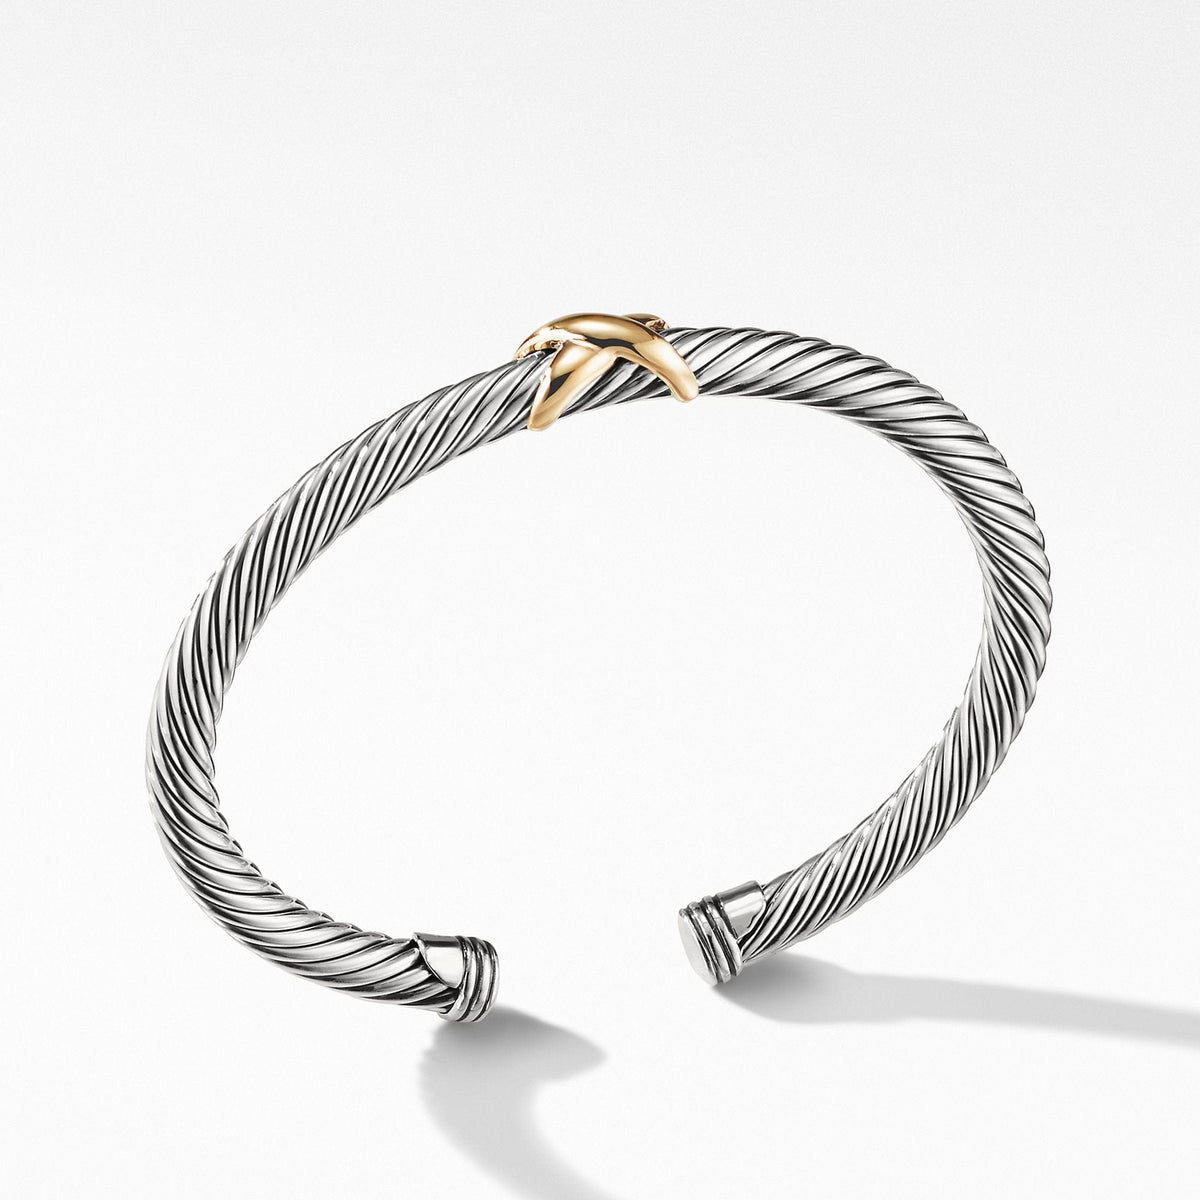 X Bracelet with Gold, Sterling Silver, Long's Jewelers